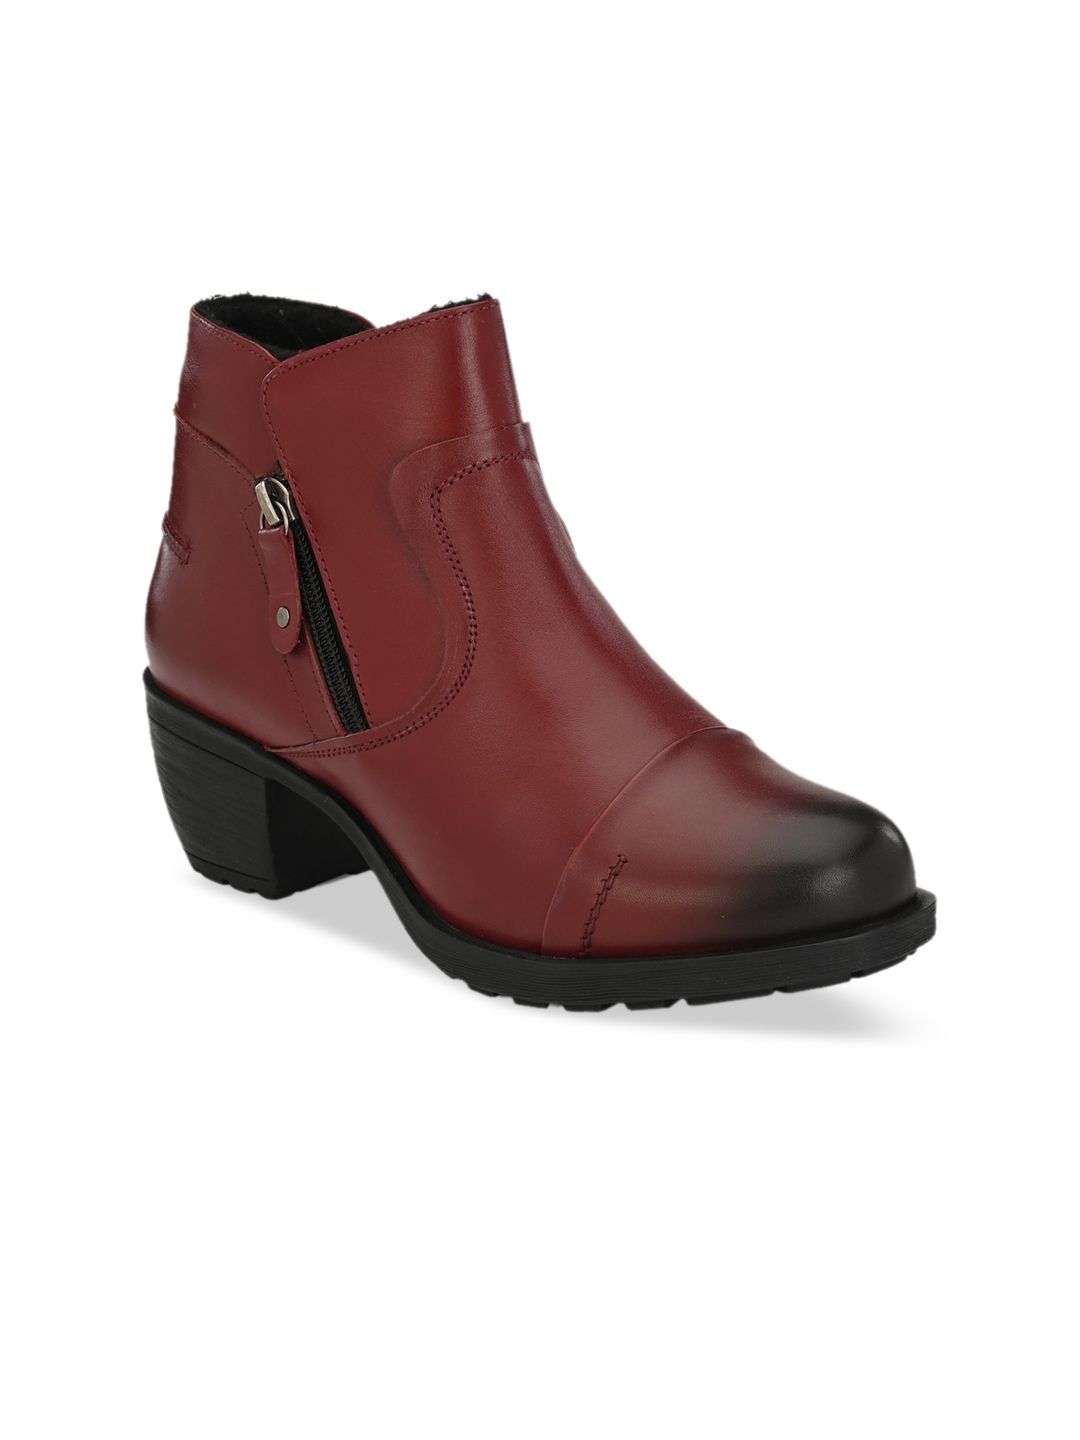 Delize Women Burgundy Solid Leather Heeled Chelsea Boots Price in India